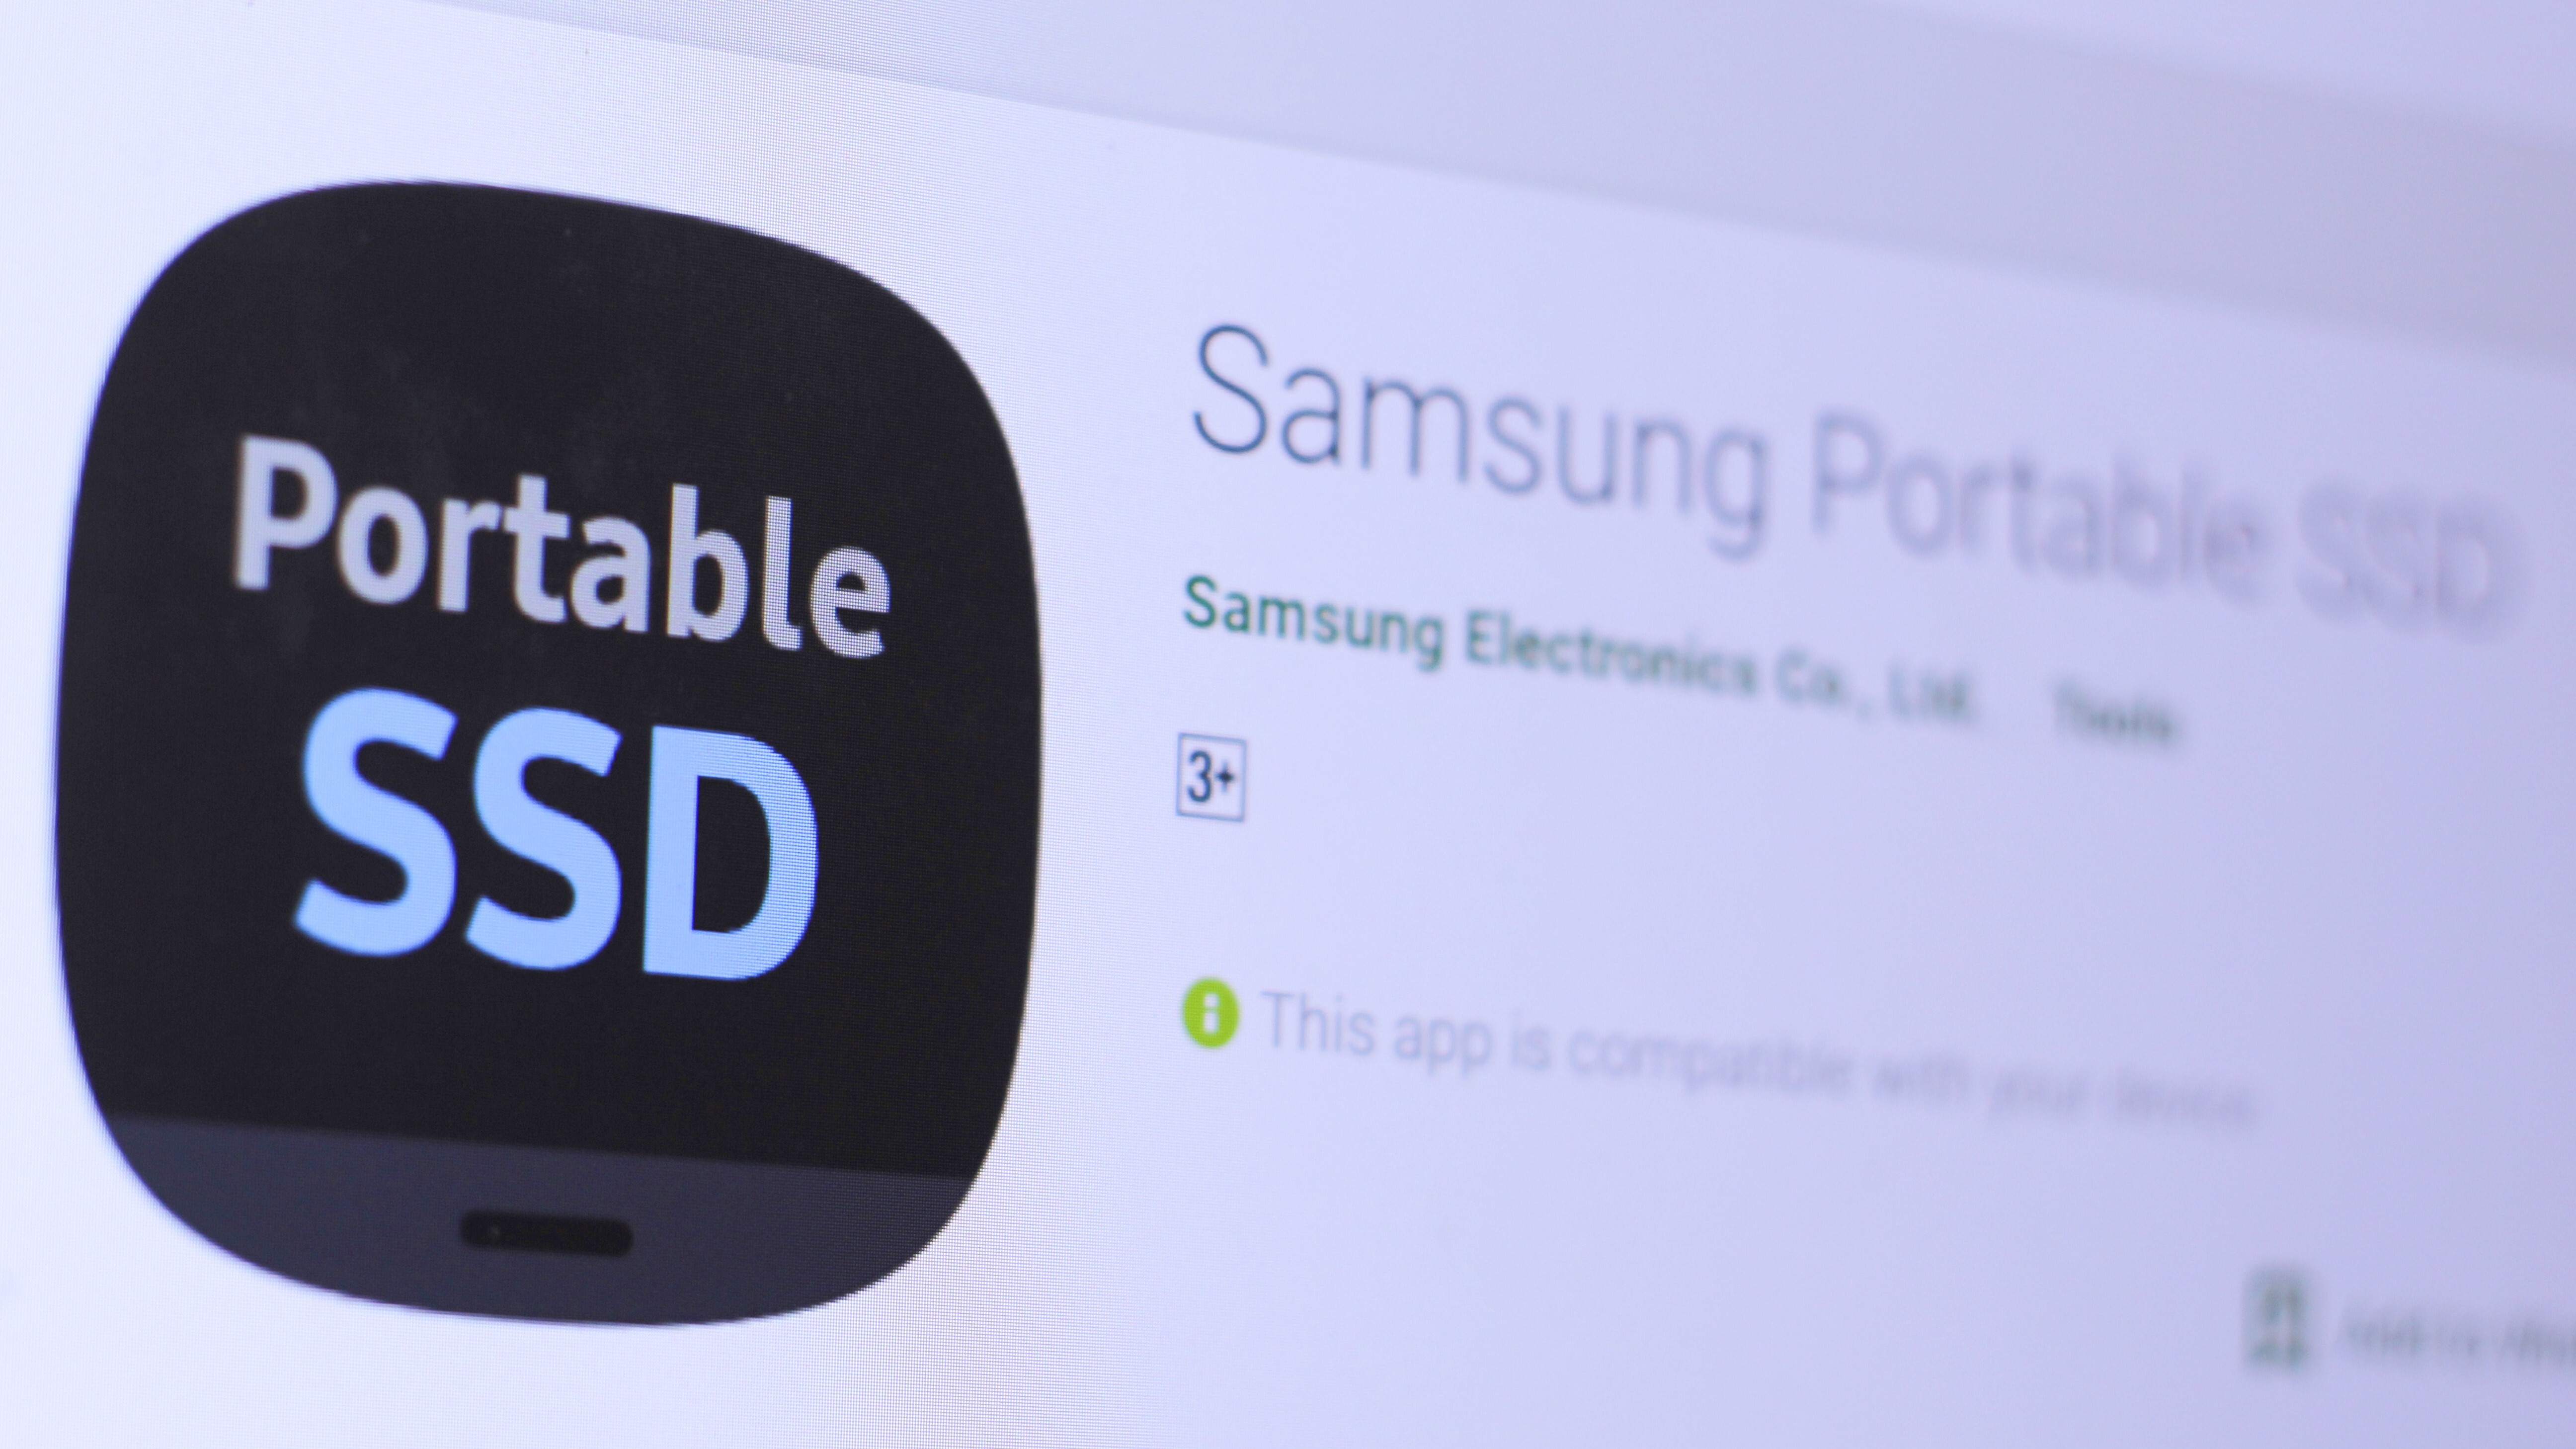 Samsung Preps T9 Portable SSD With Speeds up to 2 GB/S | Tom's